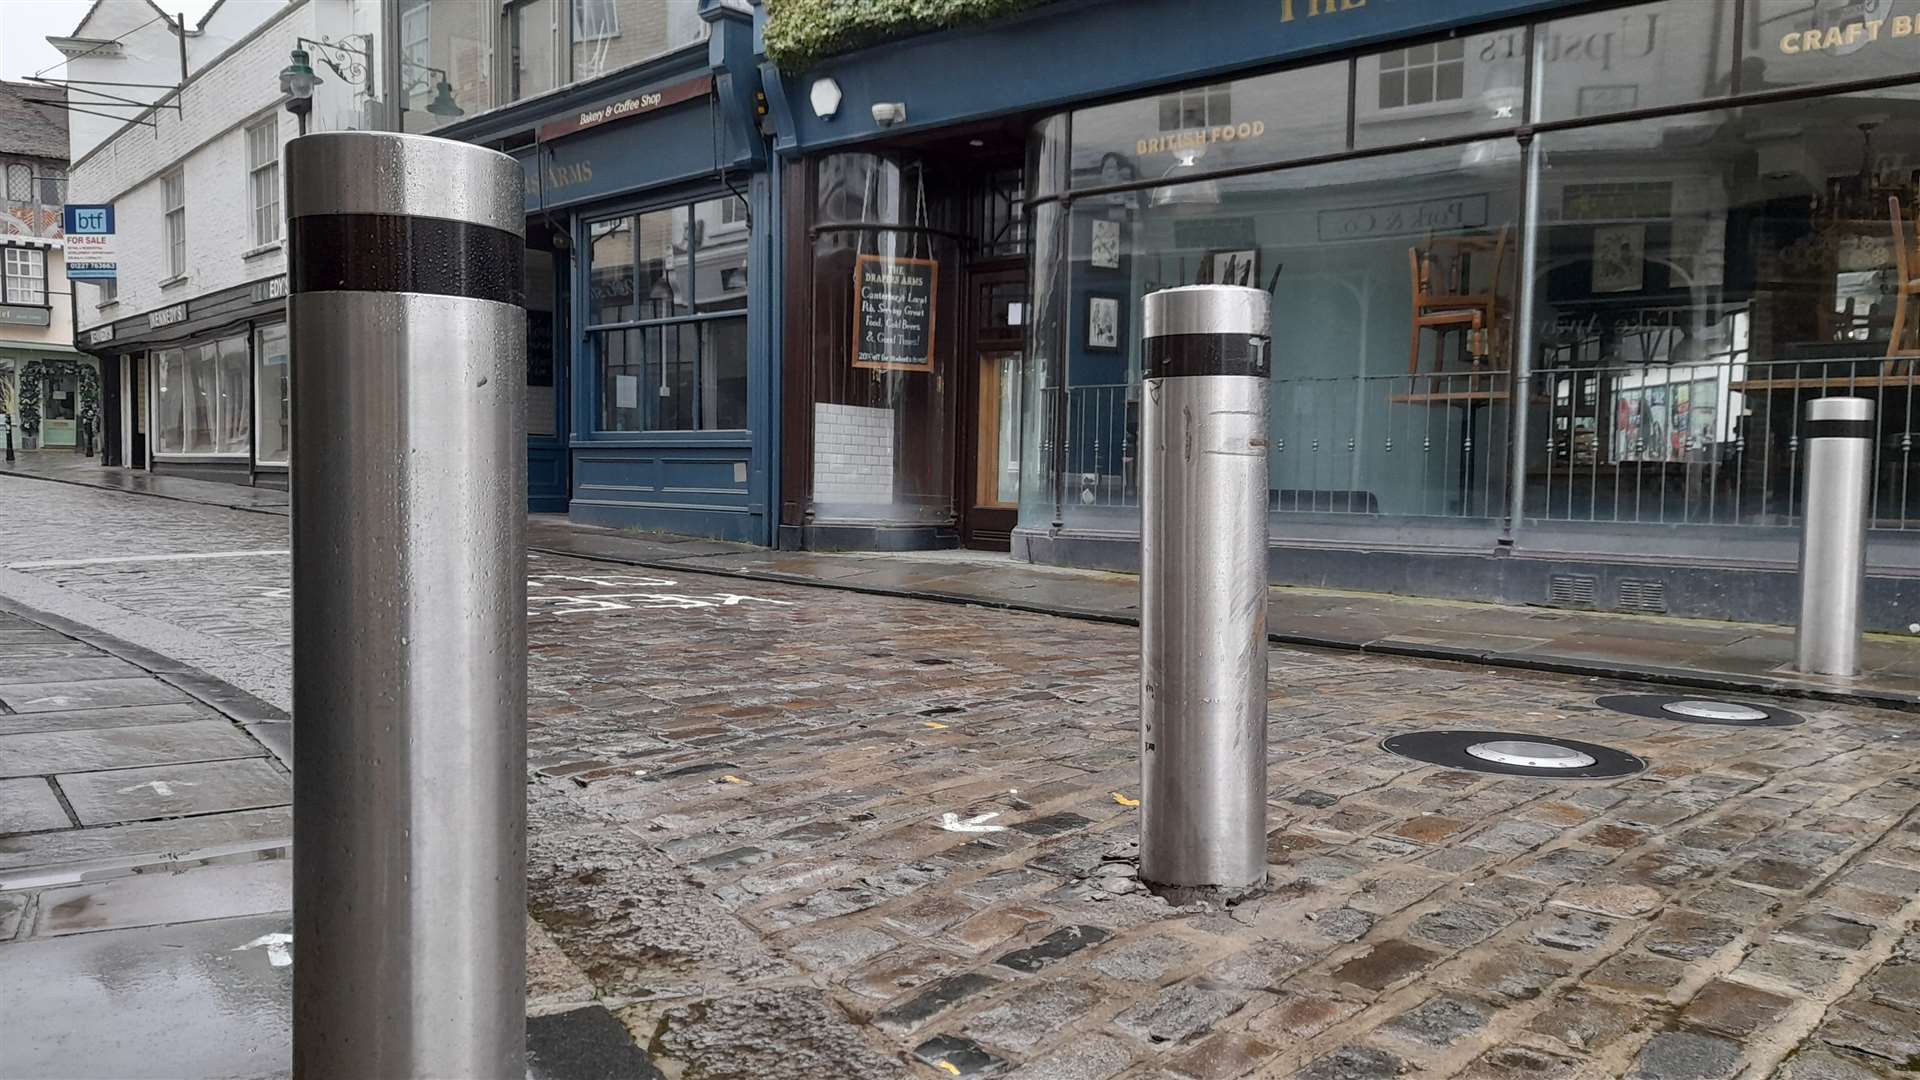 The bollards in operation in Canterbury